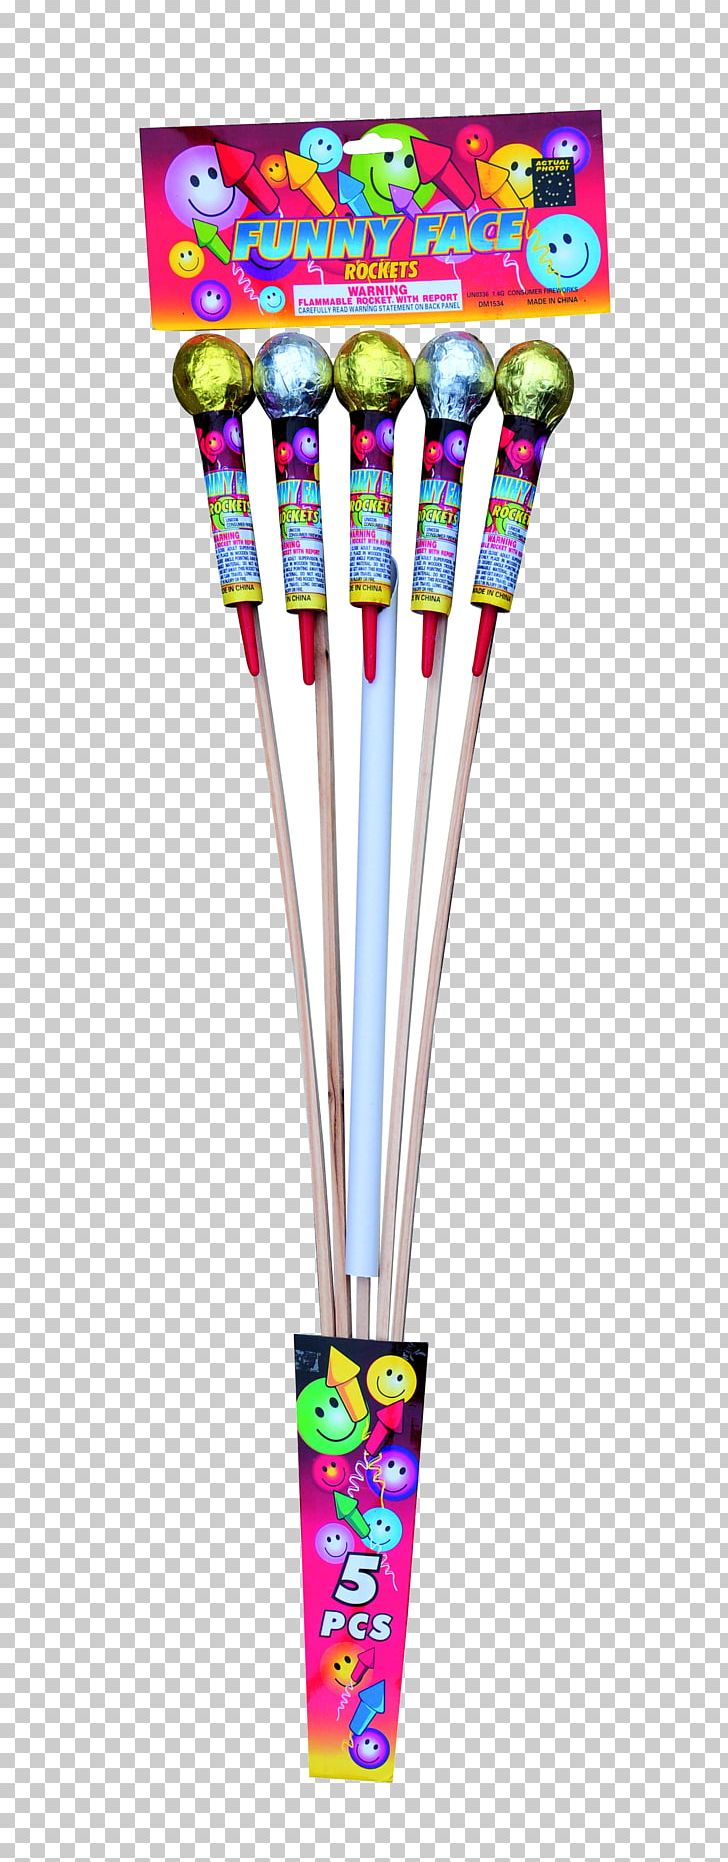 Houston Rockets Skyrocket Fireworks Household Cleaning Supply PNG, Clipart, Face, Fire, Fireworks, Funny, Funny Face Free PNG Download